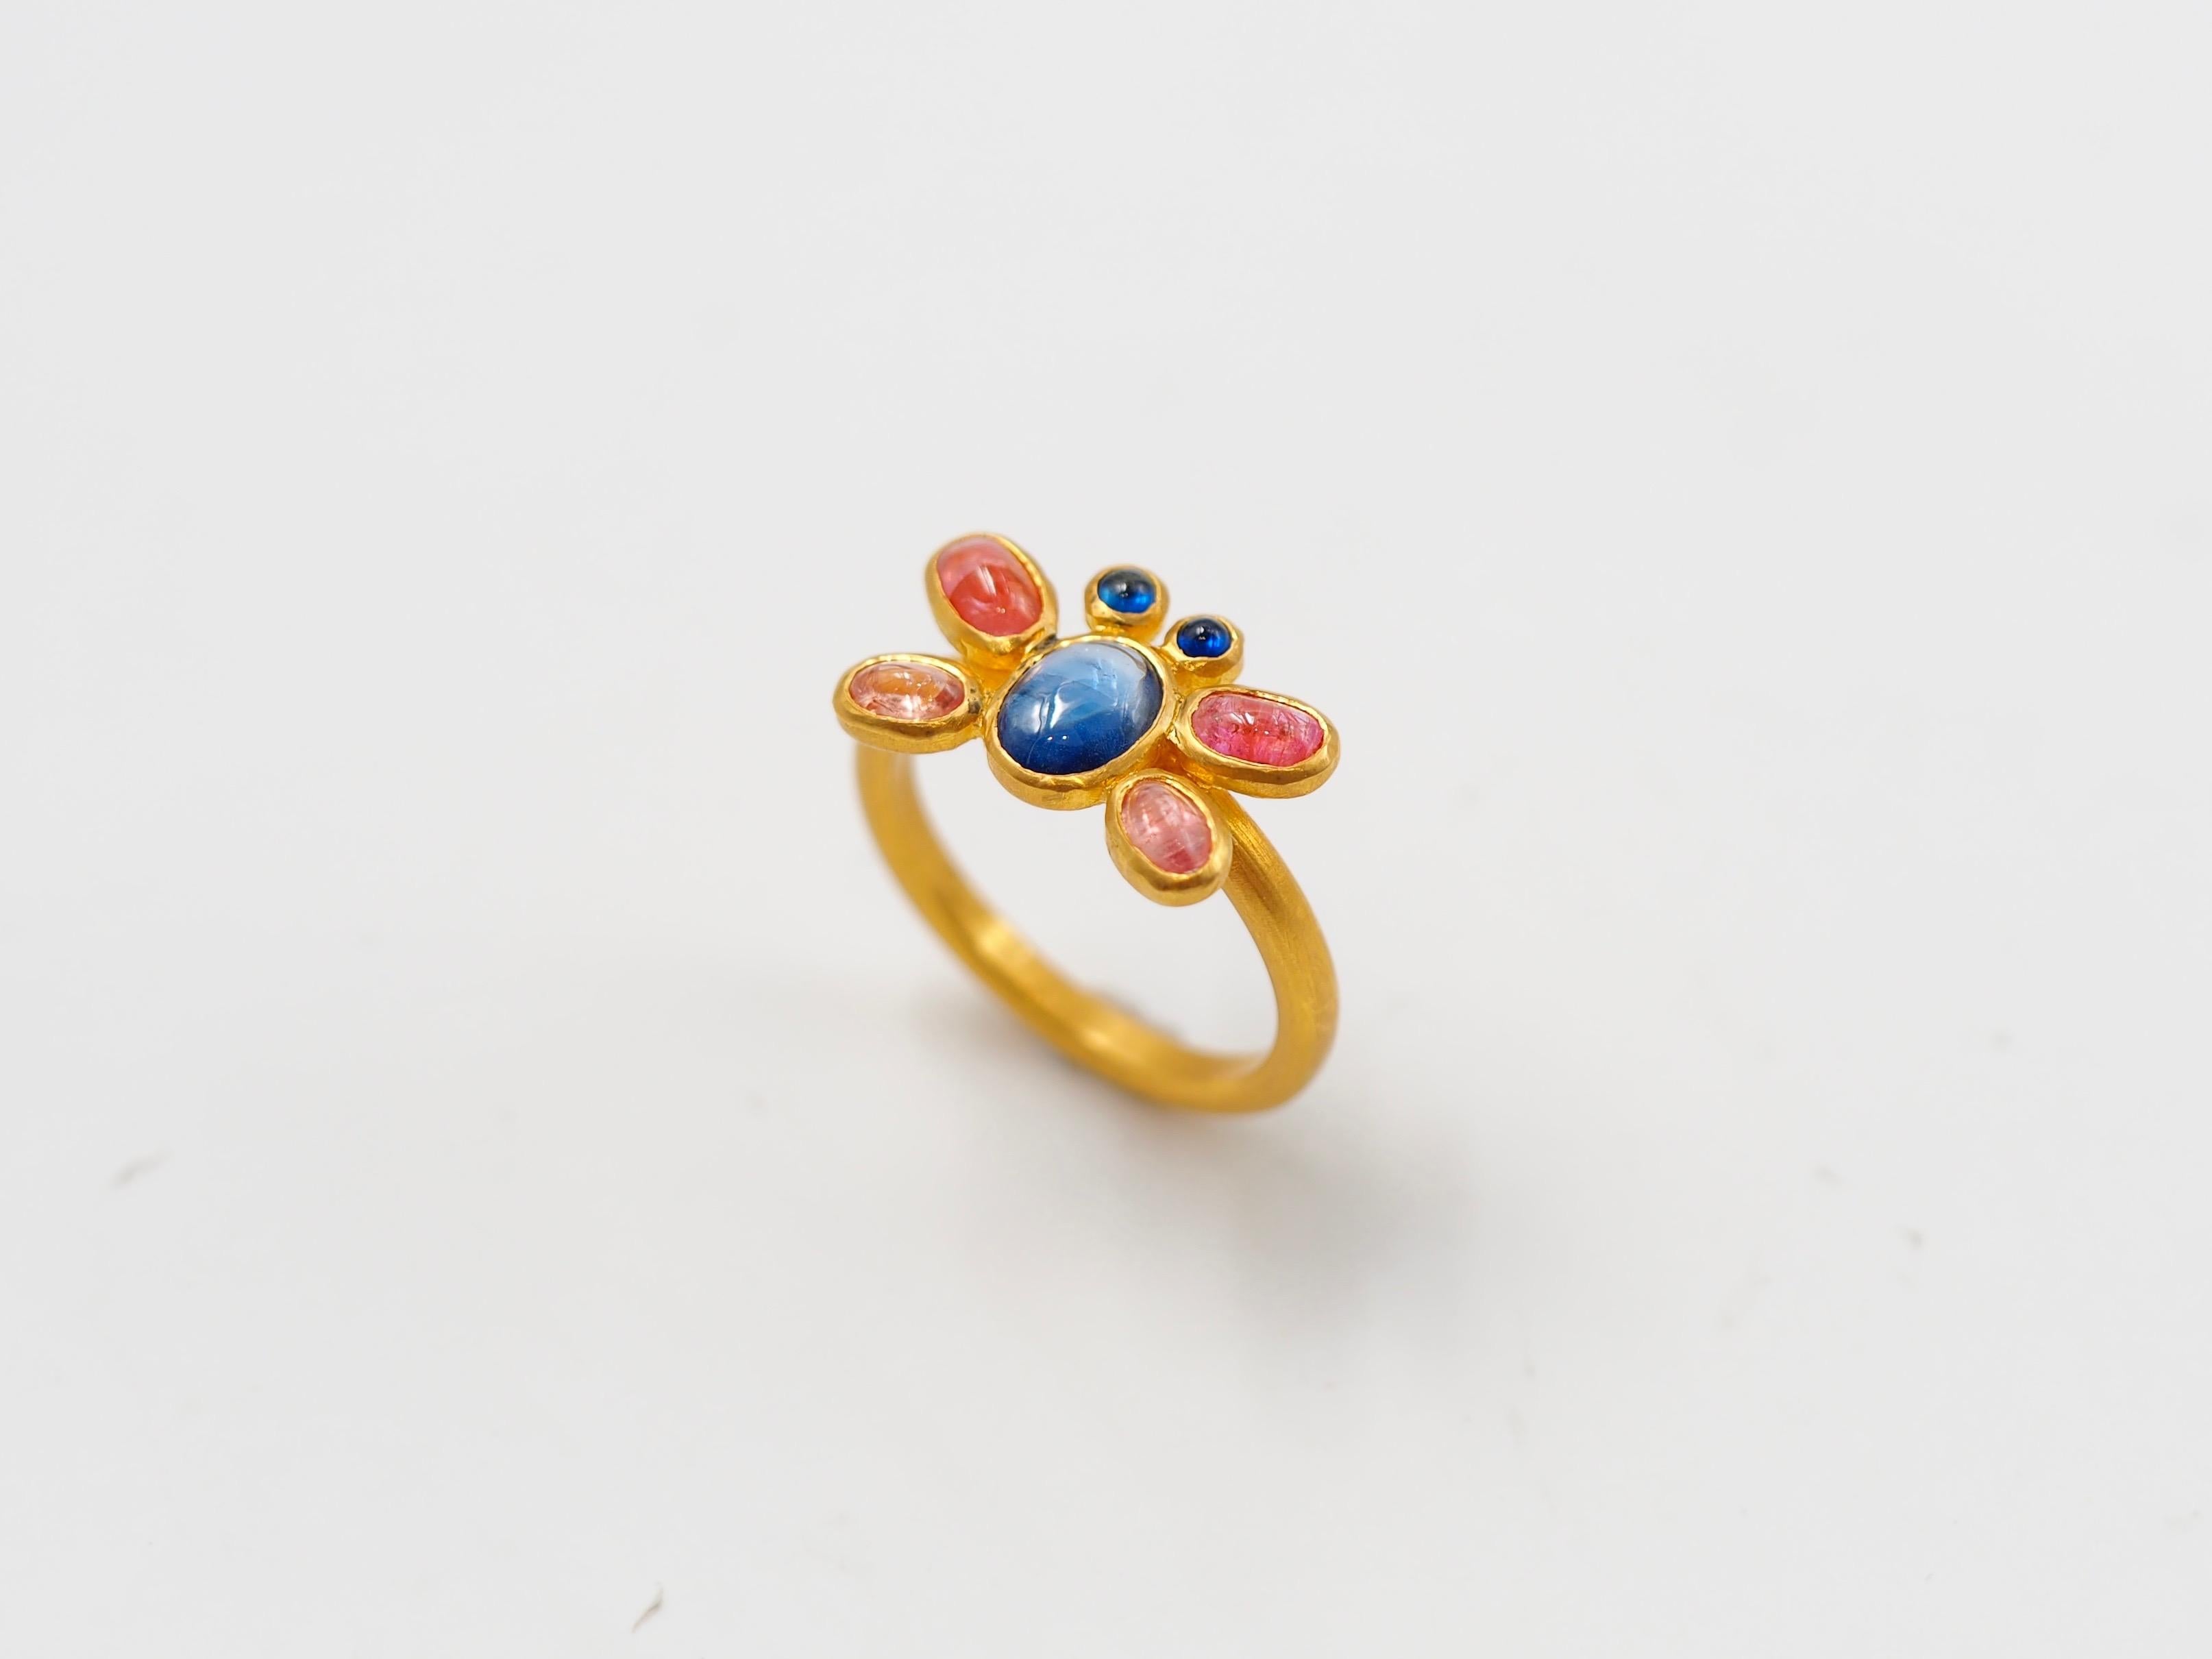 This one-of-a-kind ring by Scrives is composed of 7 sapphires (total weight of 1.42 cts, unheated from Sri lanka). Colours of sapphires are blue, orange & peach. All stones are cabochons & have different shapes. 

The stones are set in gold (closed